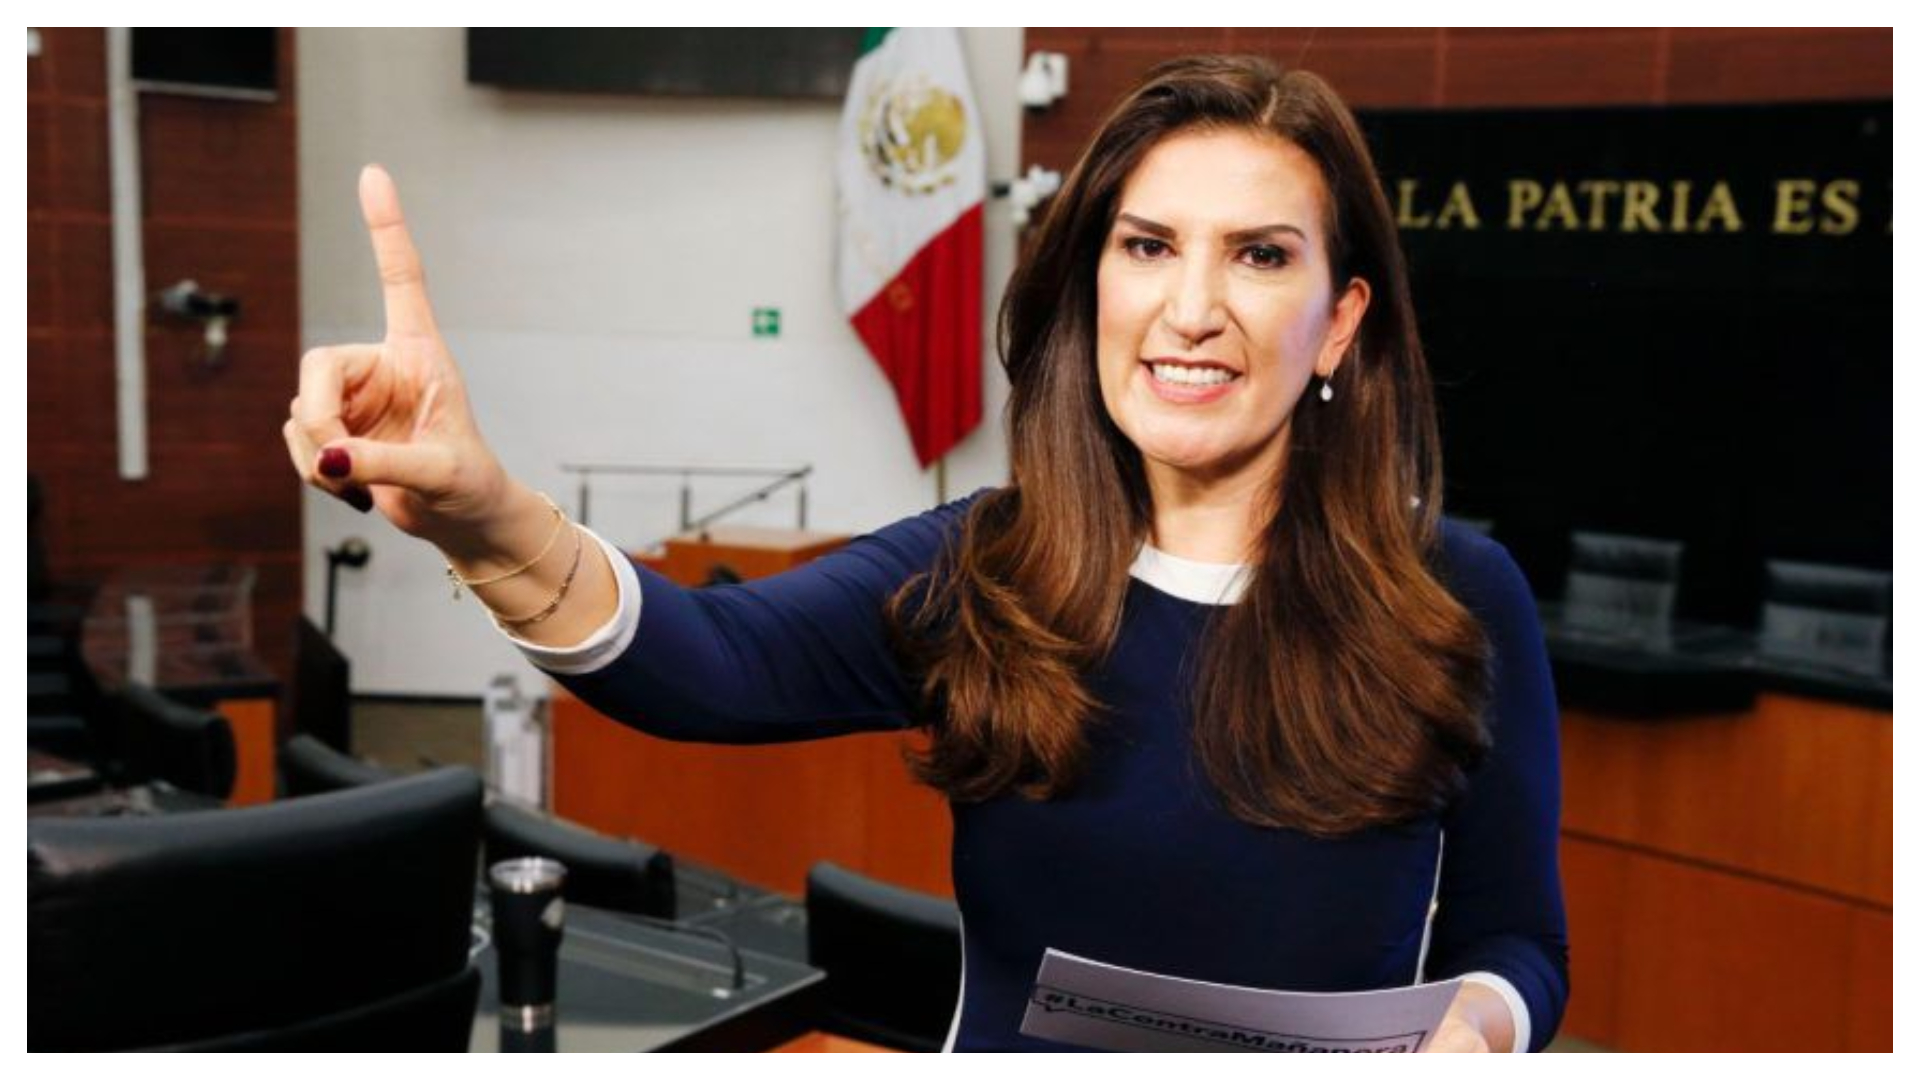 Senator Kenia López Rabadán raised her hand to be the candidate of the opposition alliance in CDMX